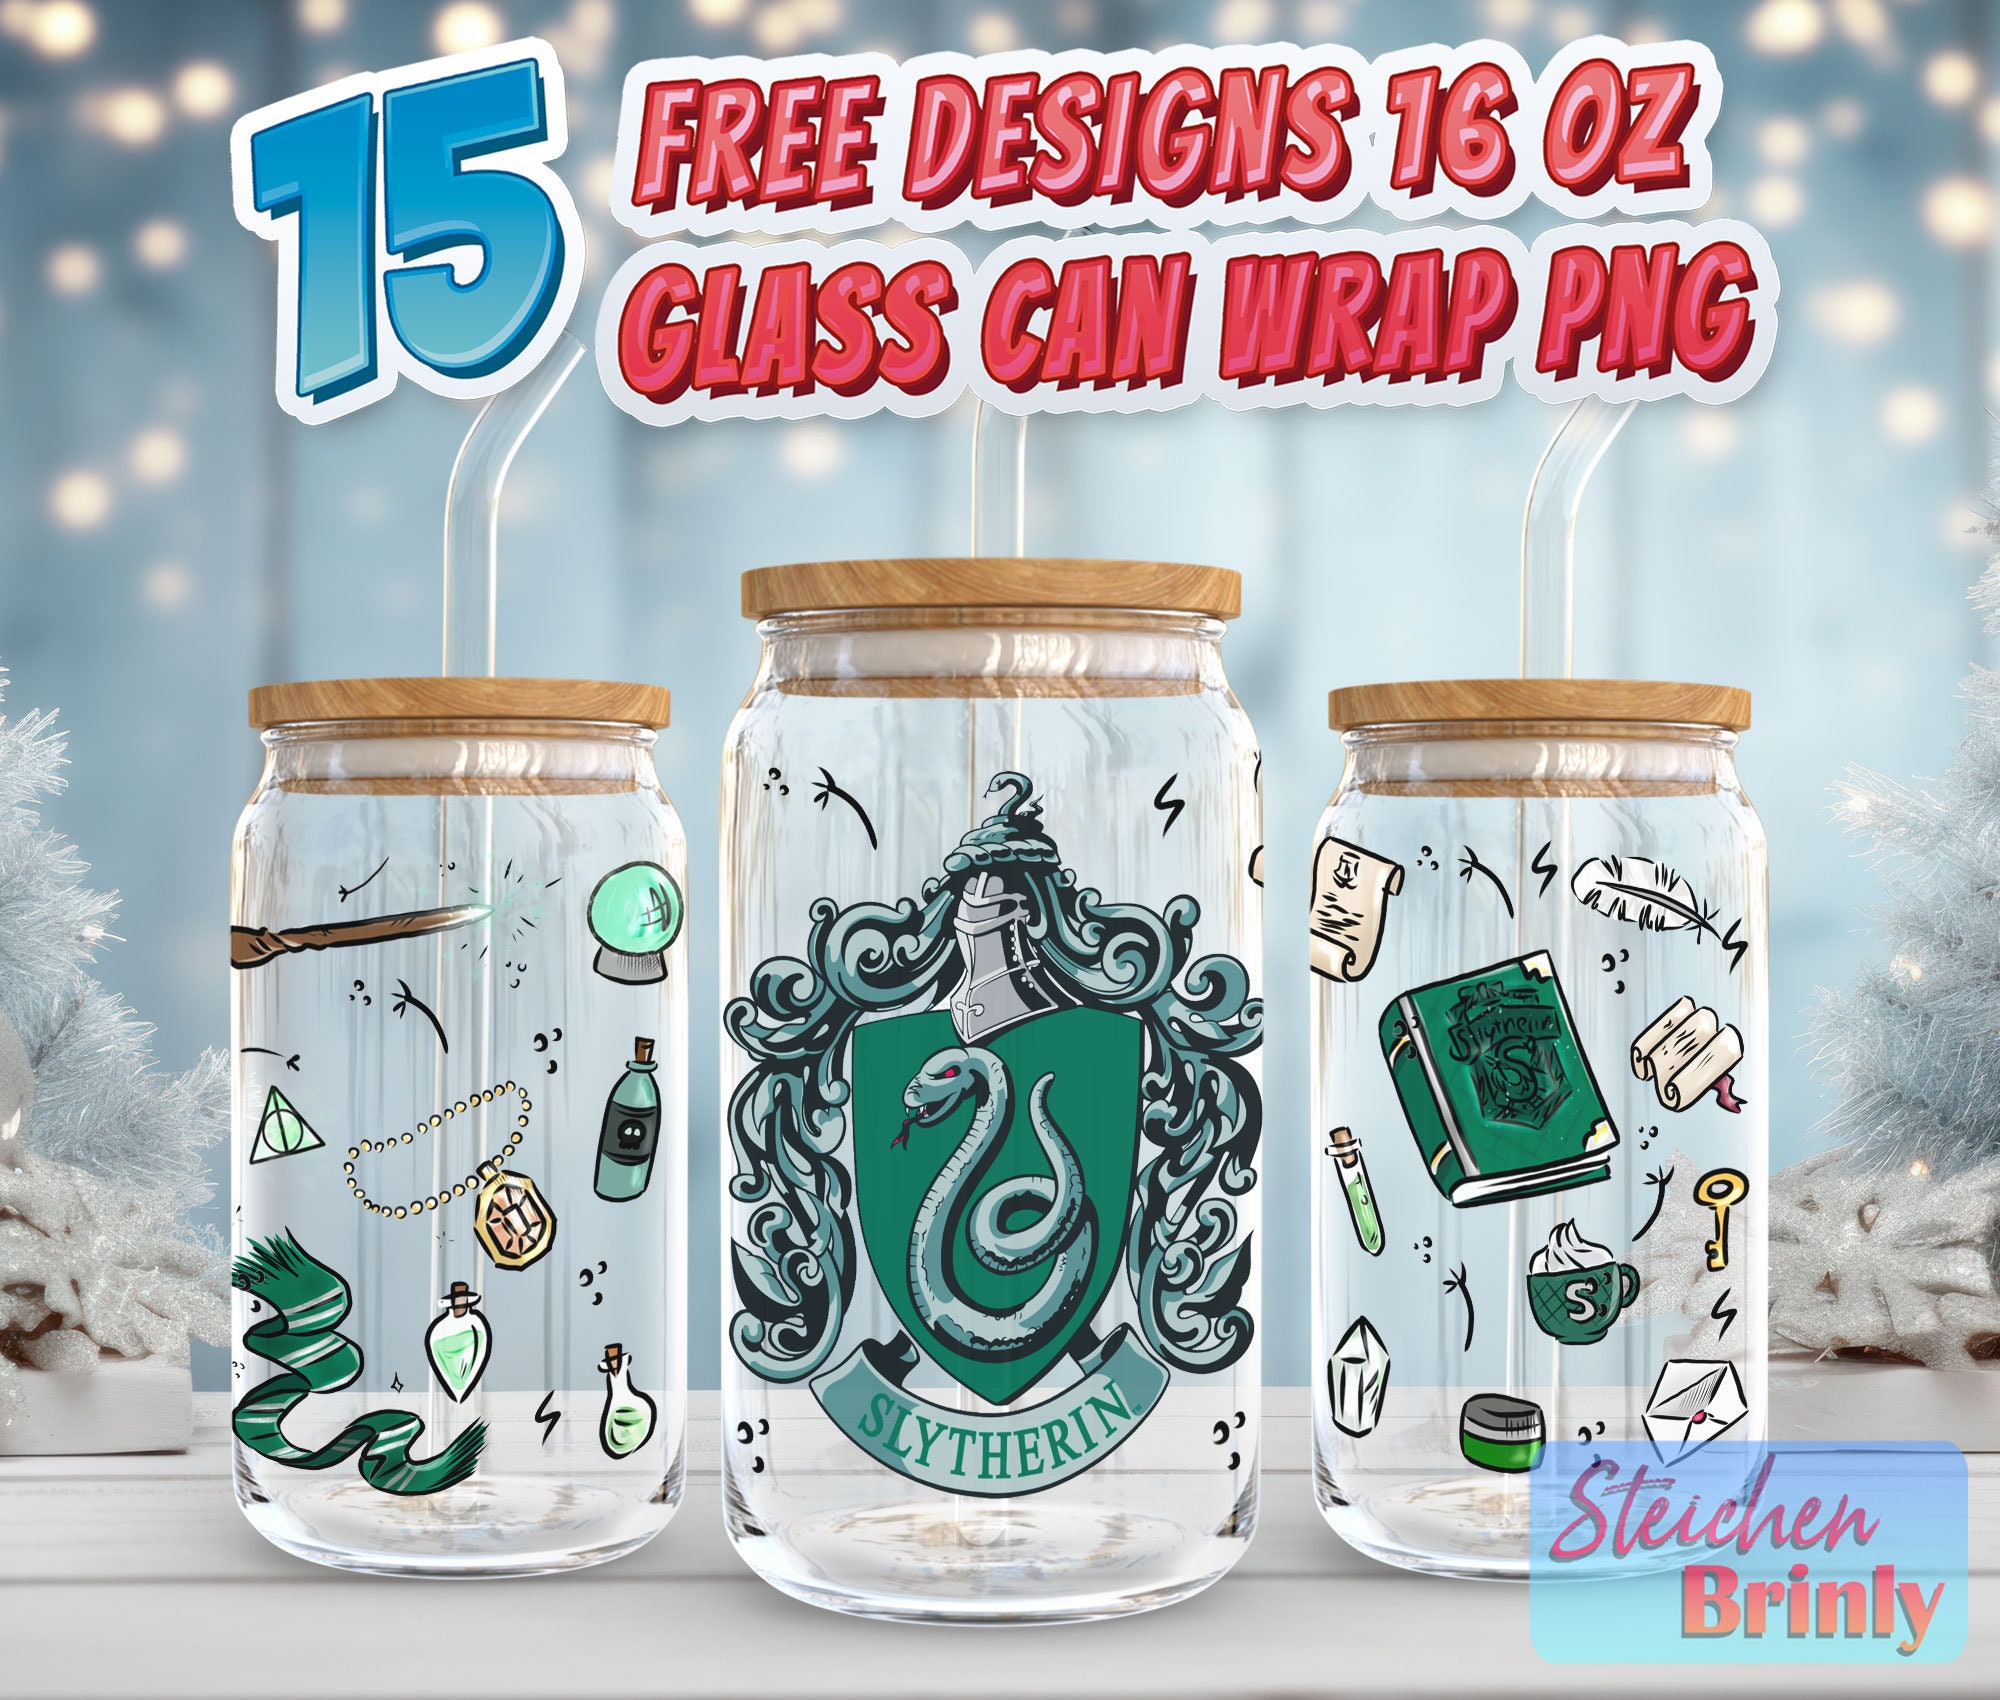 Christmas Friends Frosted Glass Cup Libbey Can Tumbler LIBBEYCHRISTMAS –  Bailey Bunch Designs